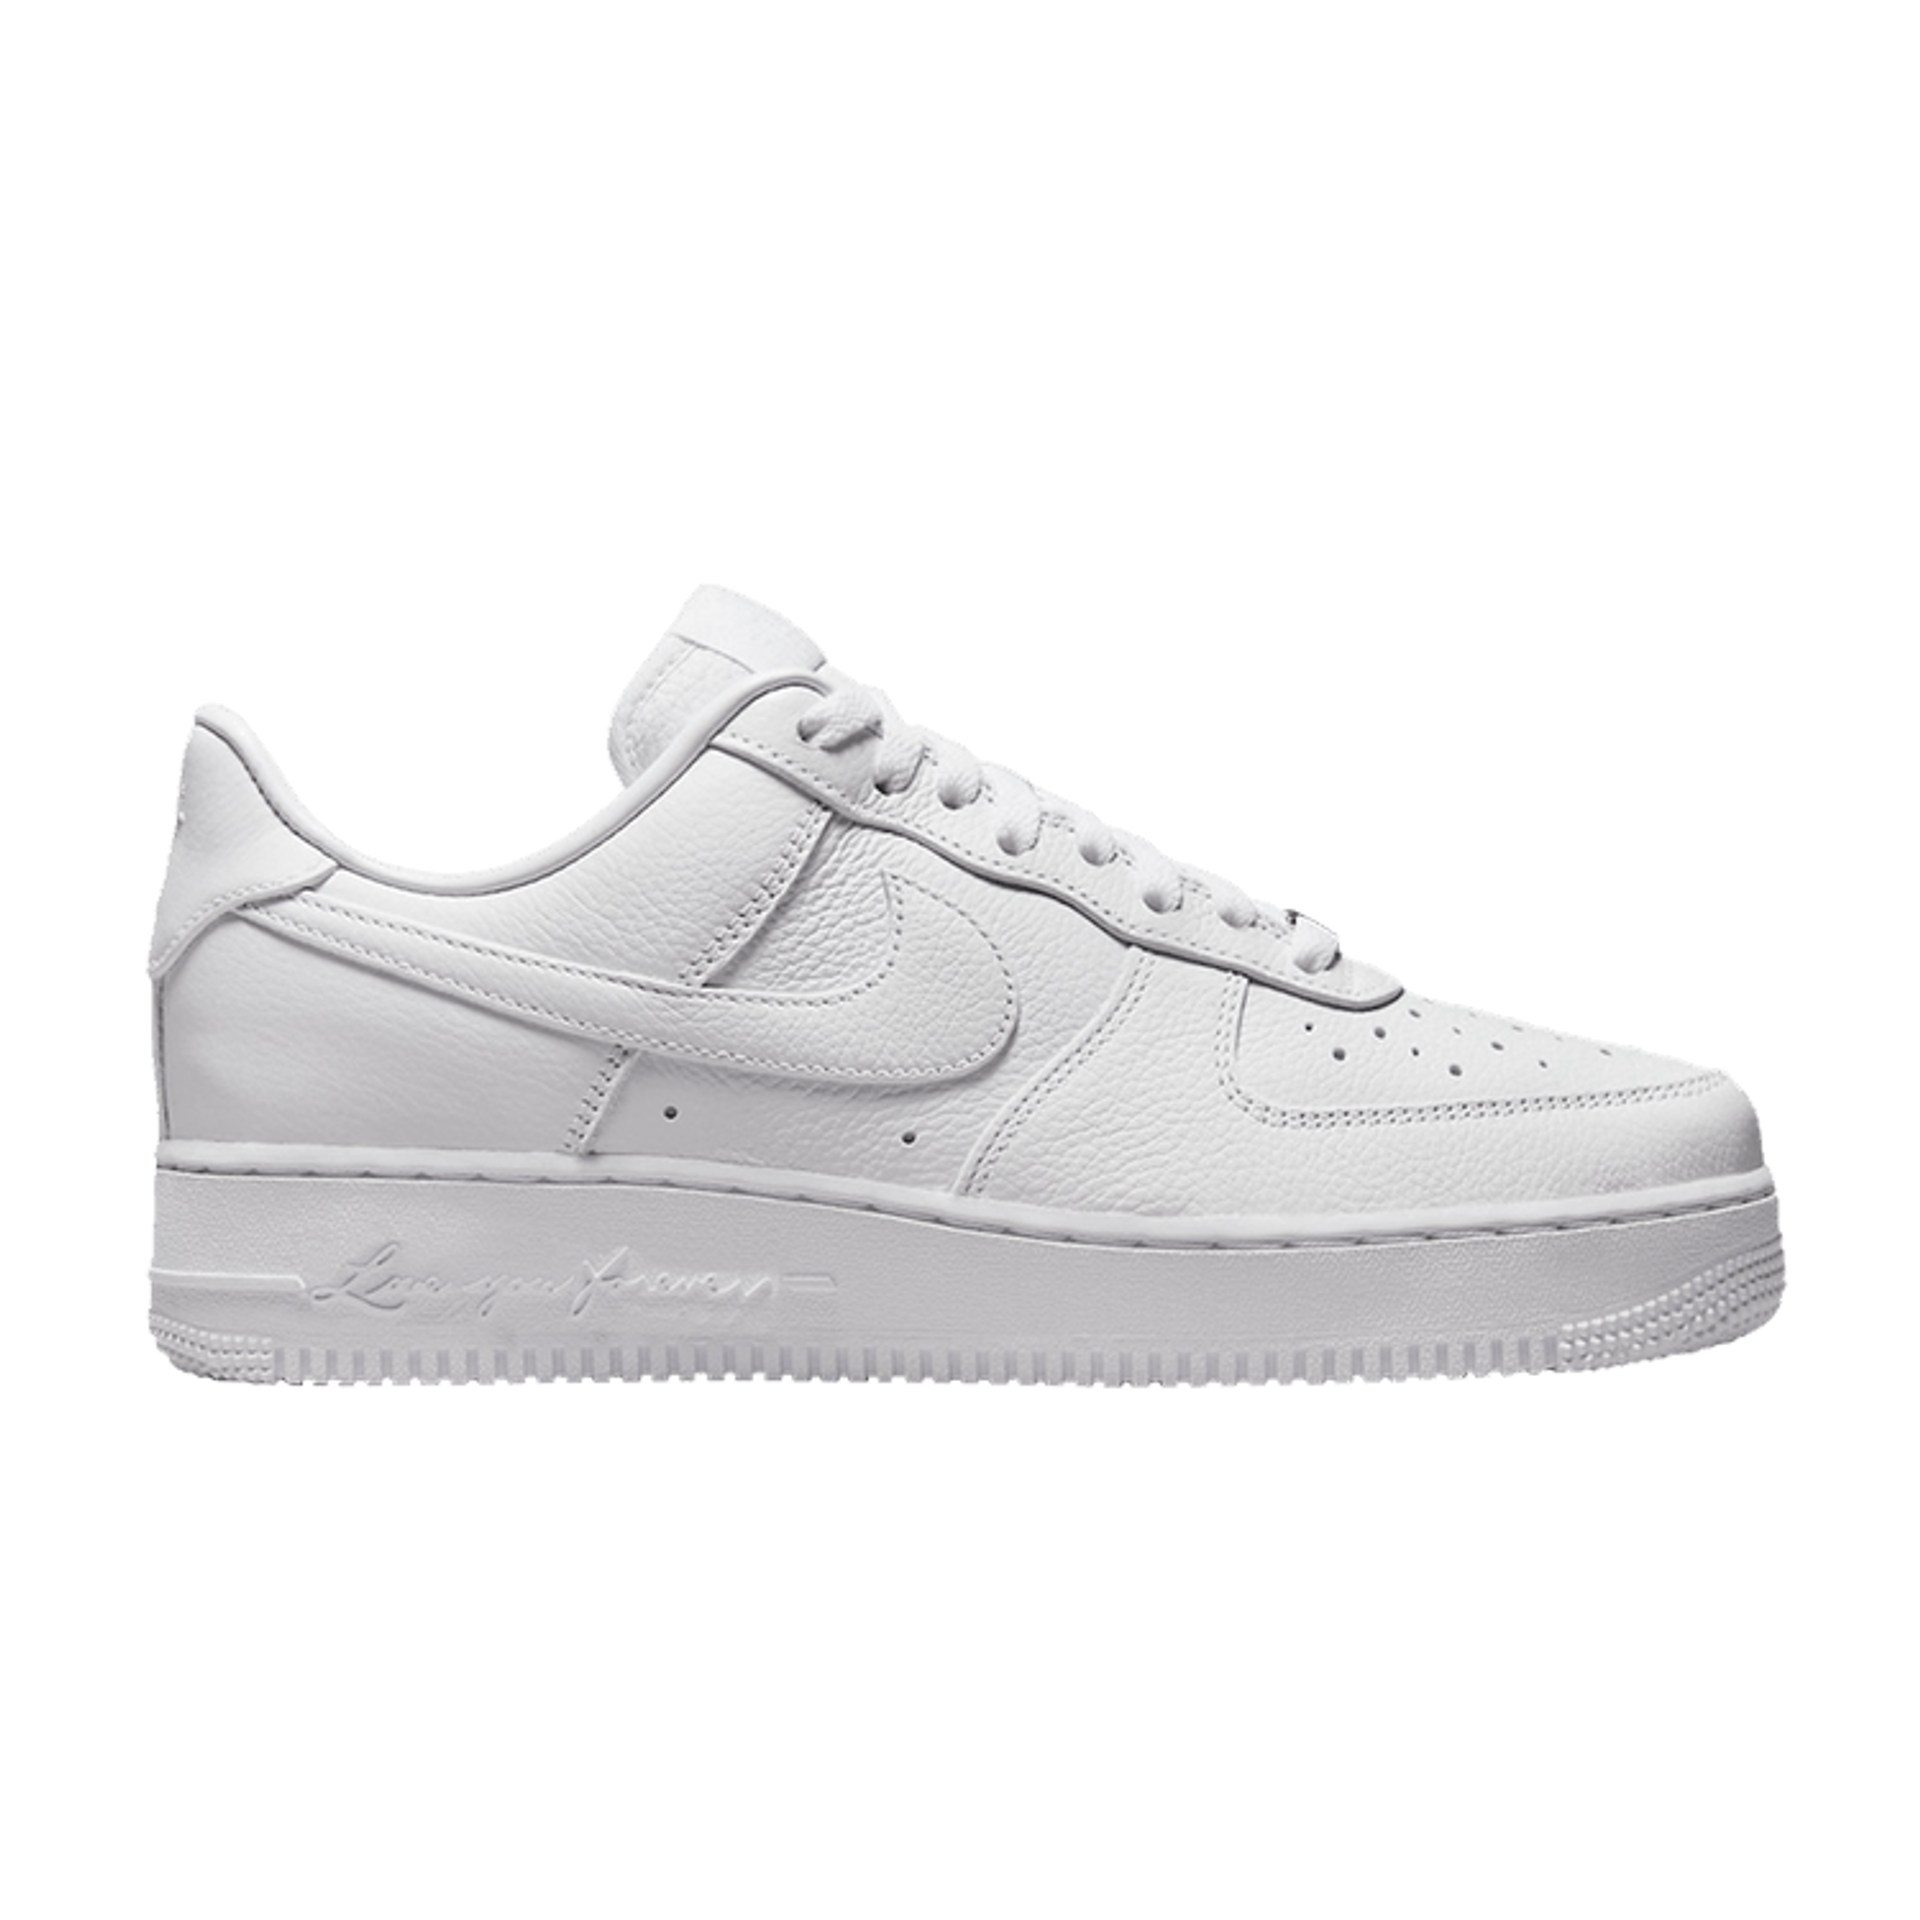 NOCTA x Air Force 1 Low 'Certified Lover Boy'